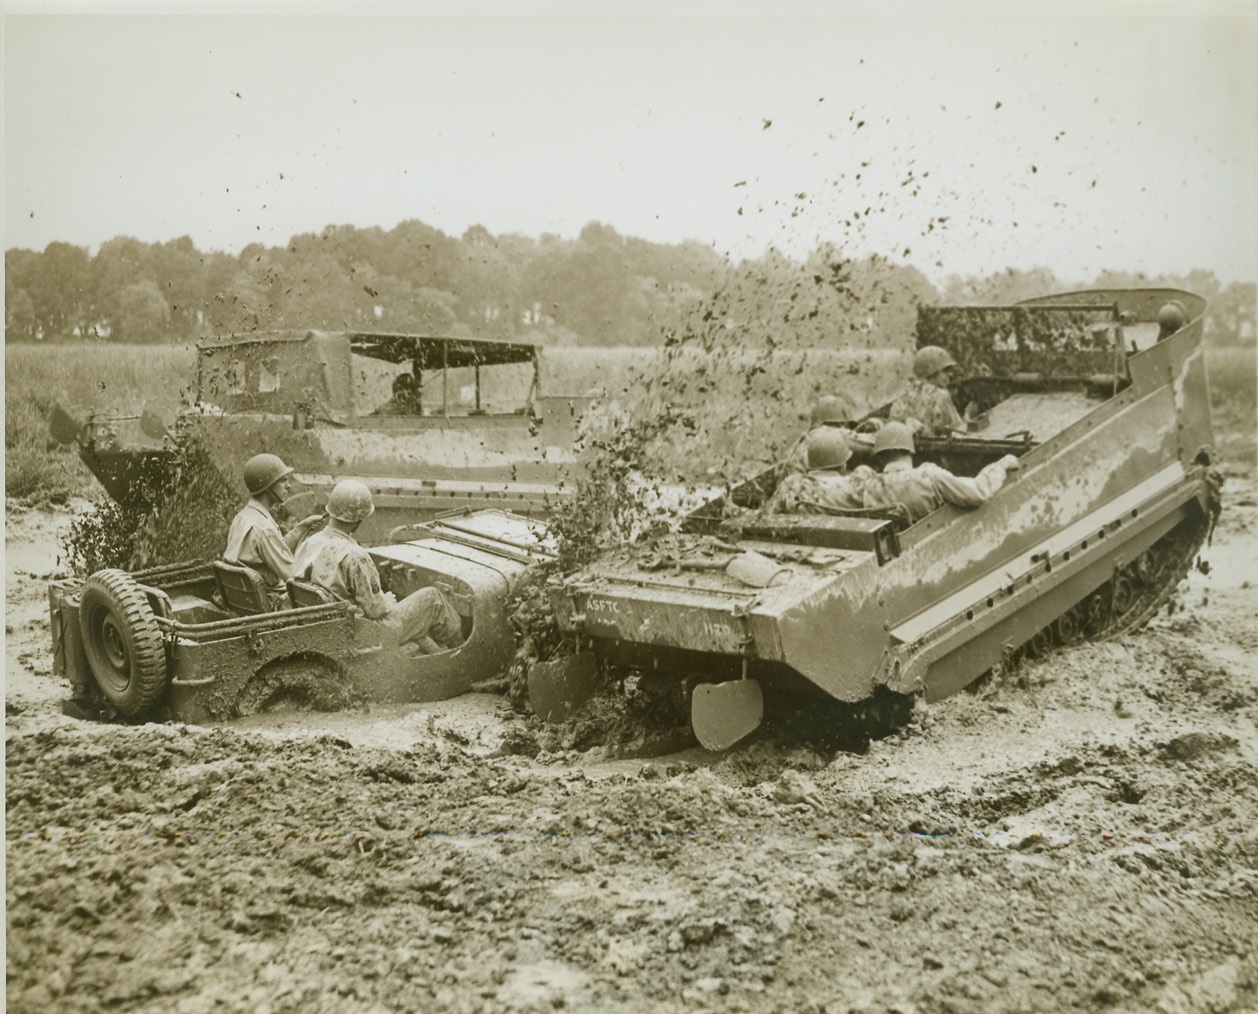 THE M-29, ALL PURPOSE CARGO CARRIER, 9/1/1944. ABERDEEN, MD. – The “Weasel”, M-29 Light Cargo Carrier, sloughs through the mud as it bypasses a stranded jeep on the proving grounds at Aberdeen, MD. The M-29, which is used on amphibious and swamp operations, has a full tack and rudders, and is capable of amazingly high speeds on the ground. Credit: OWI Radiophoto from ACME;